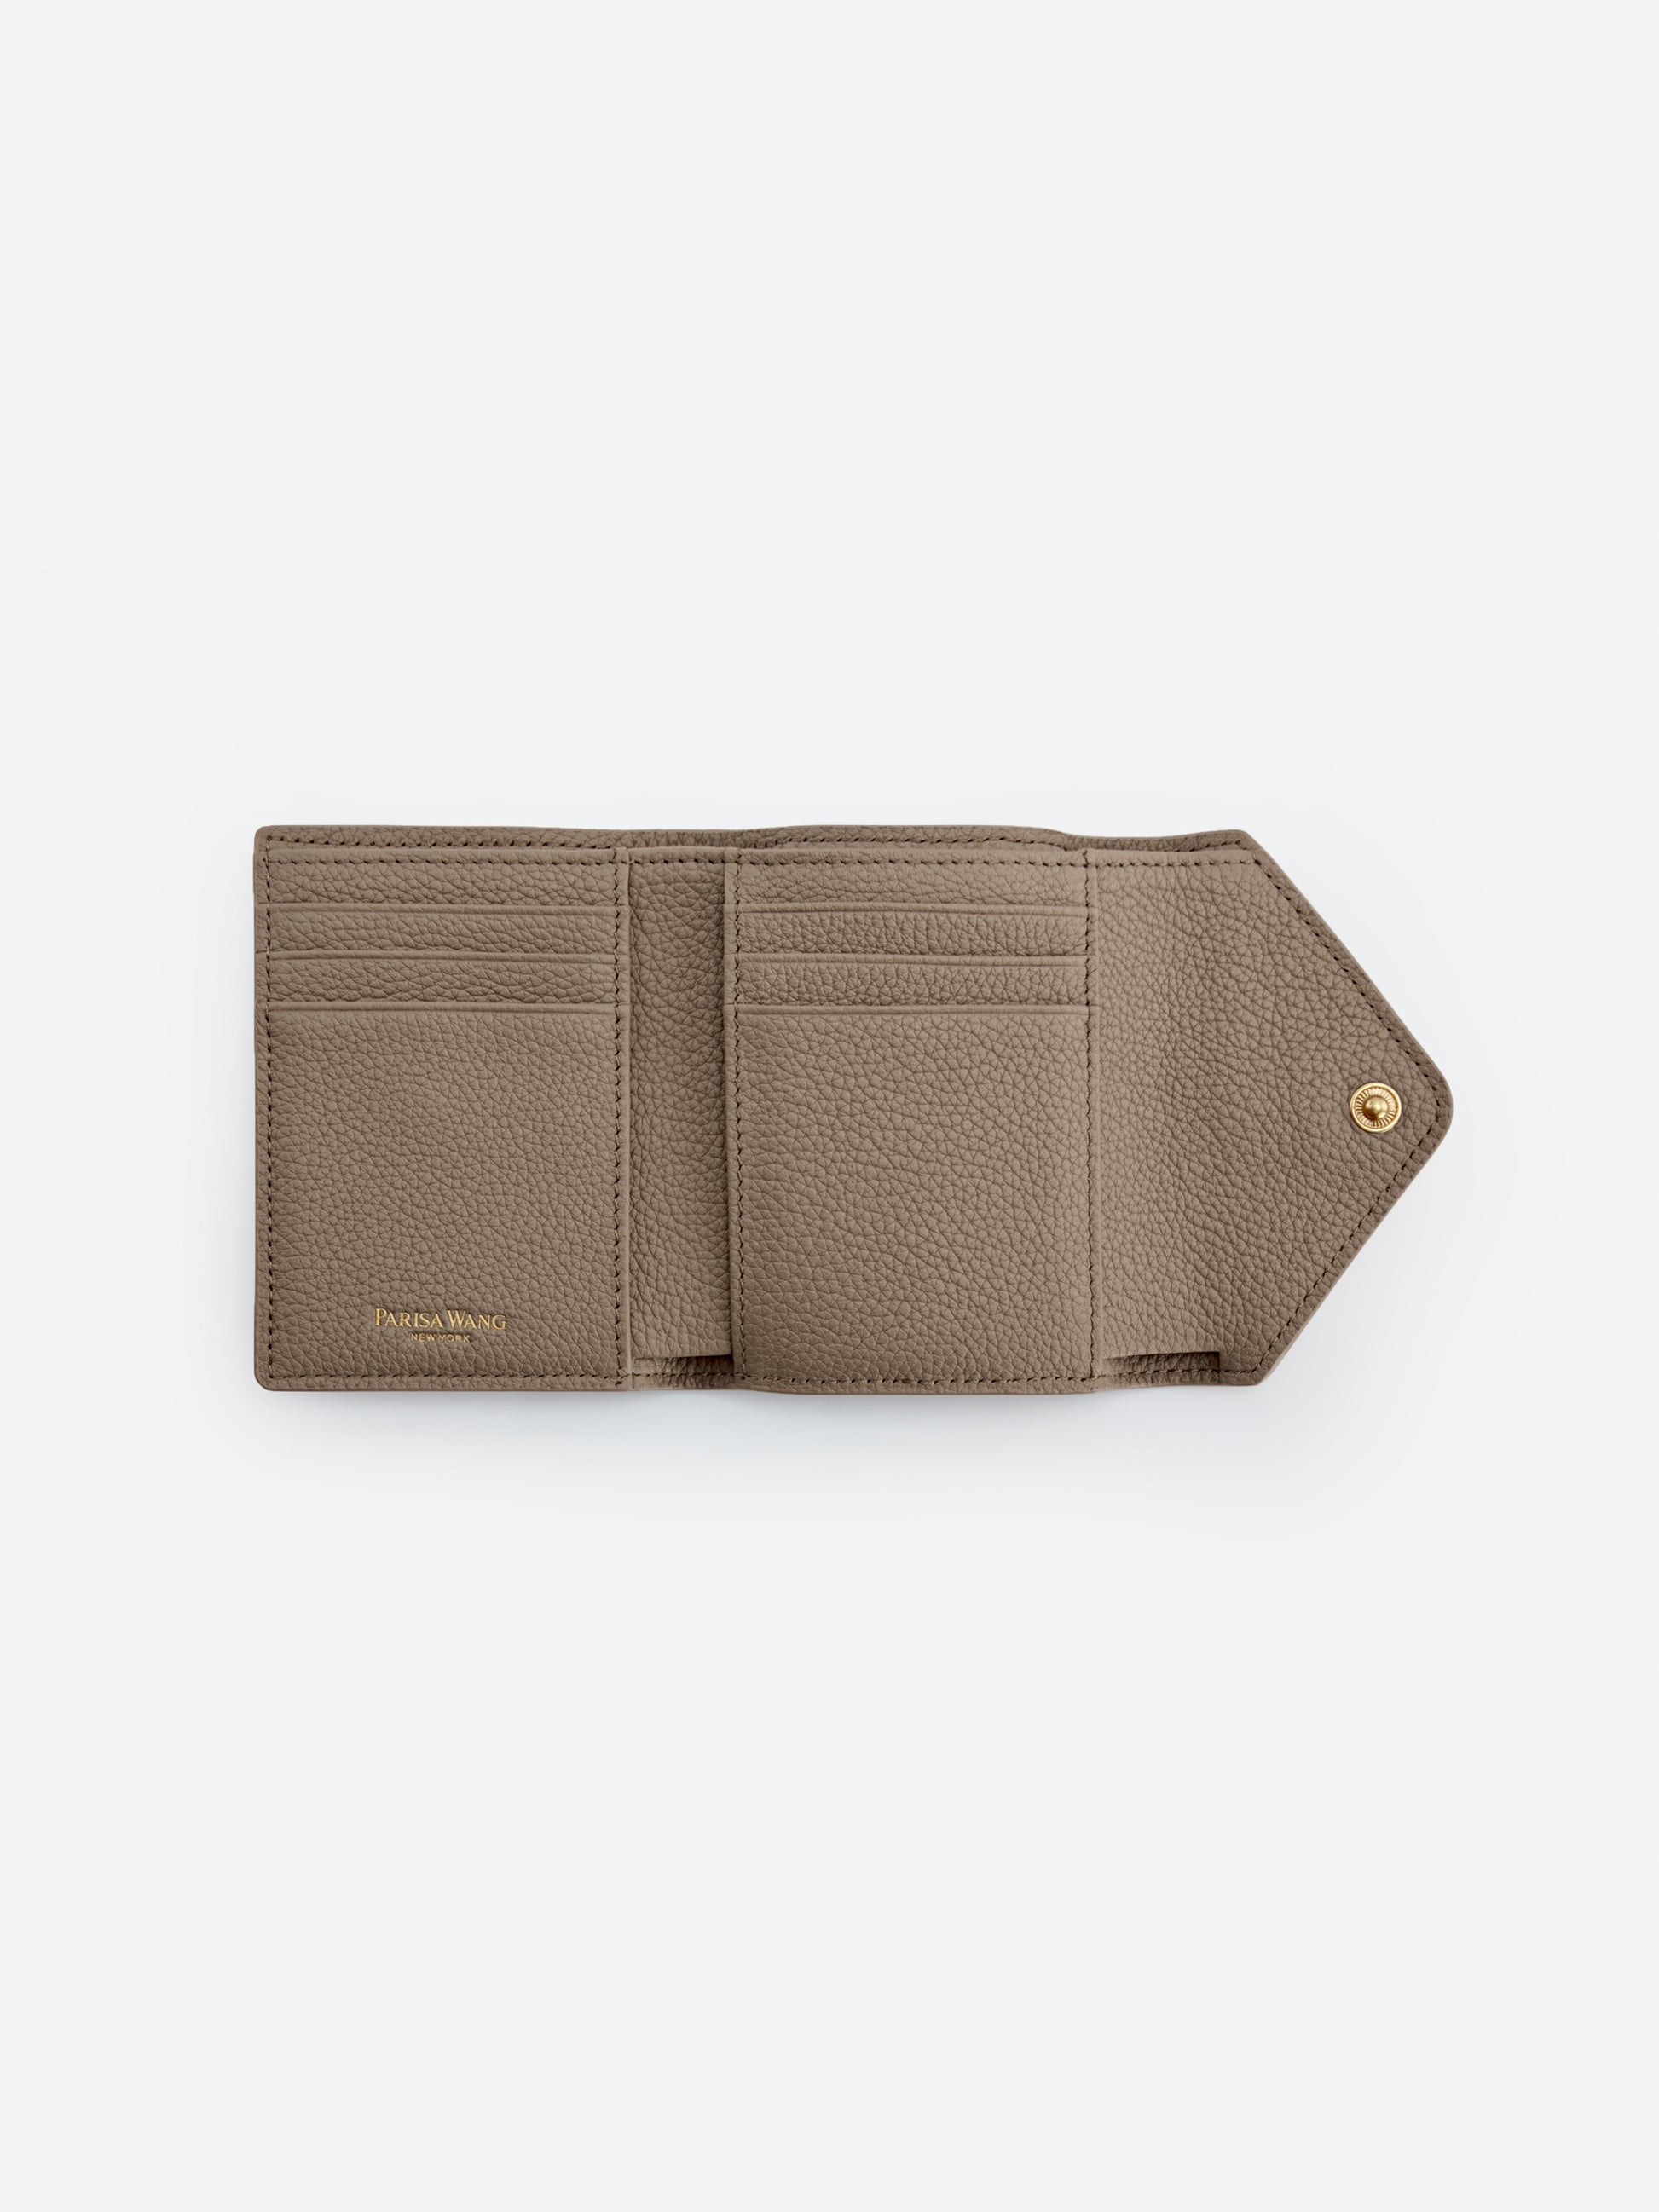 PW Small Envelope Wallet in Taupe | Parisa Wang | Featured